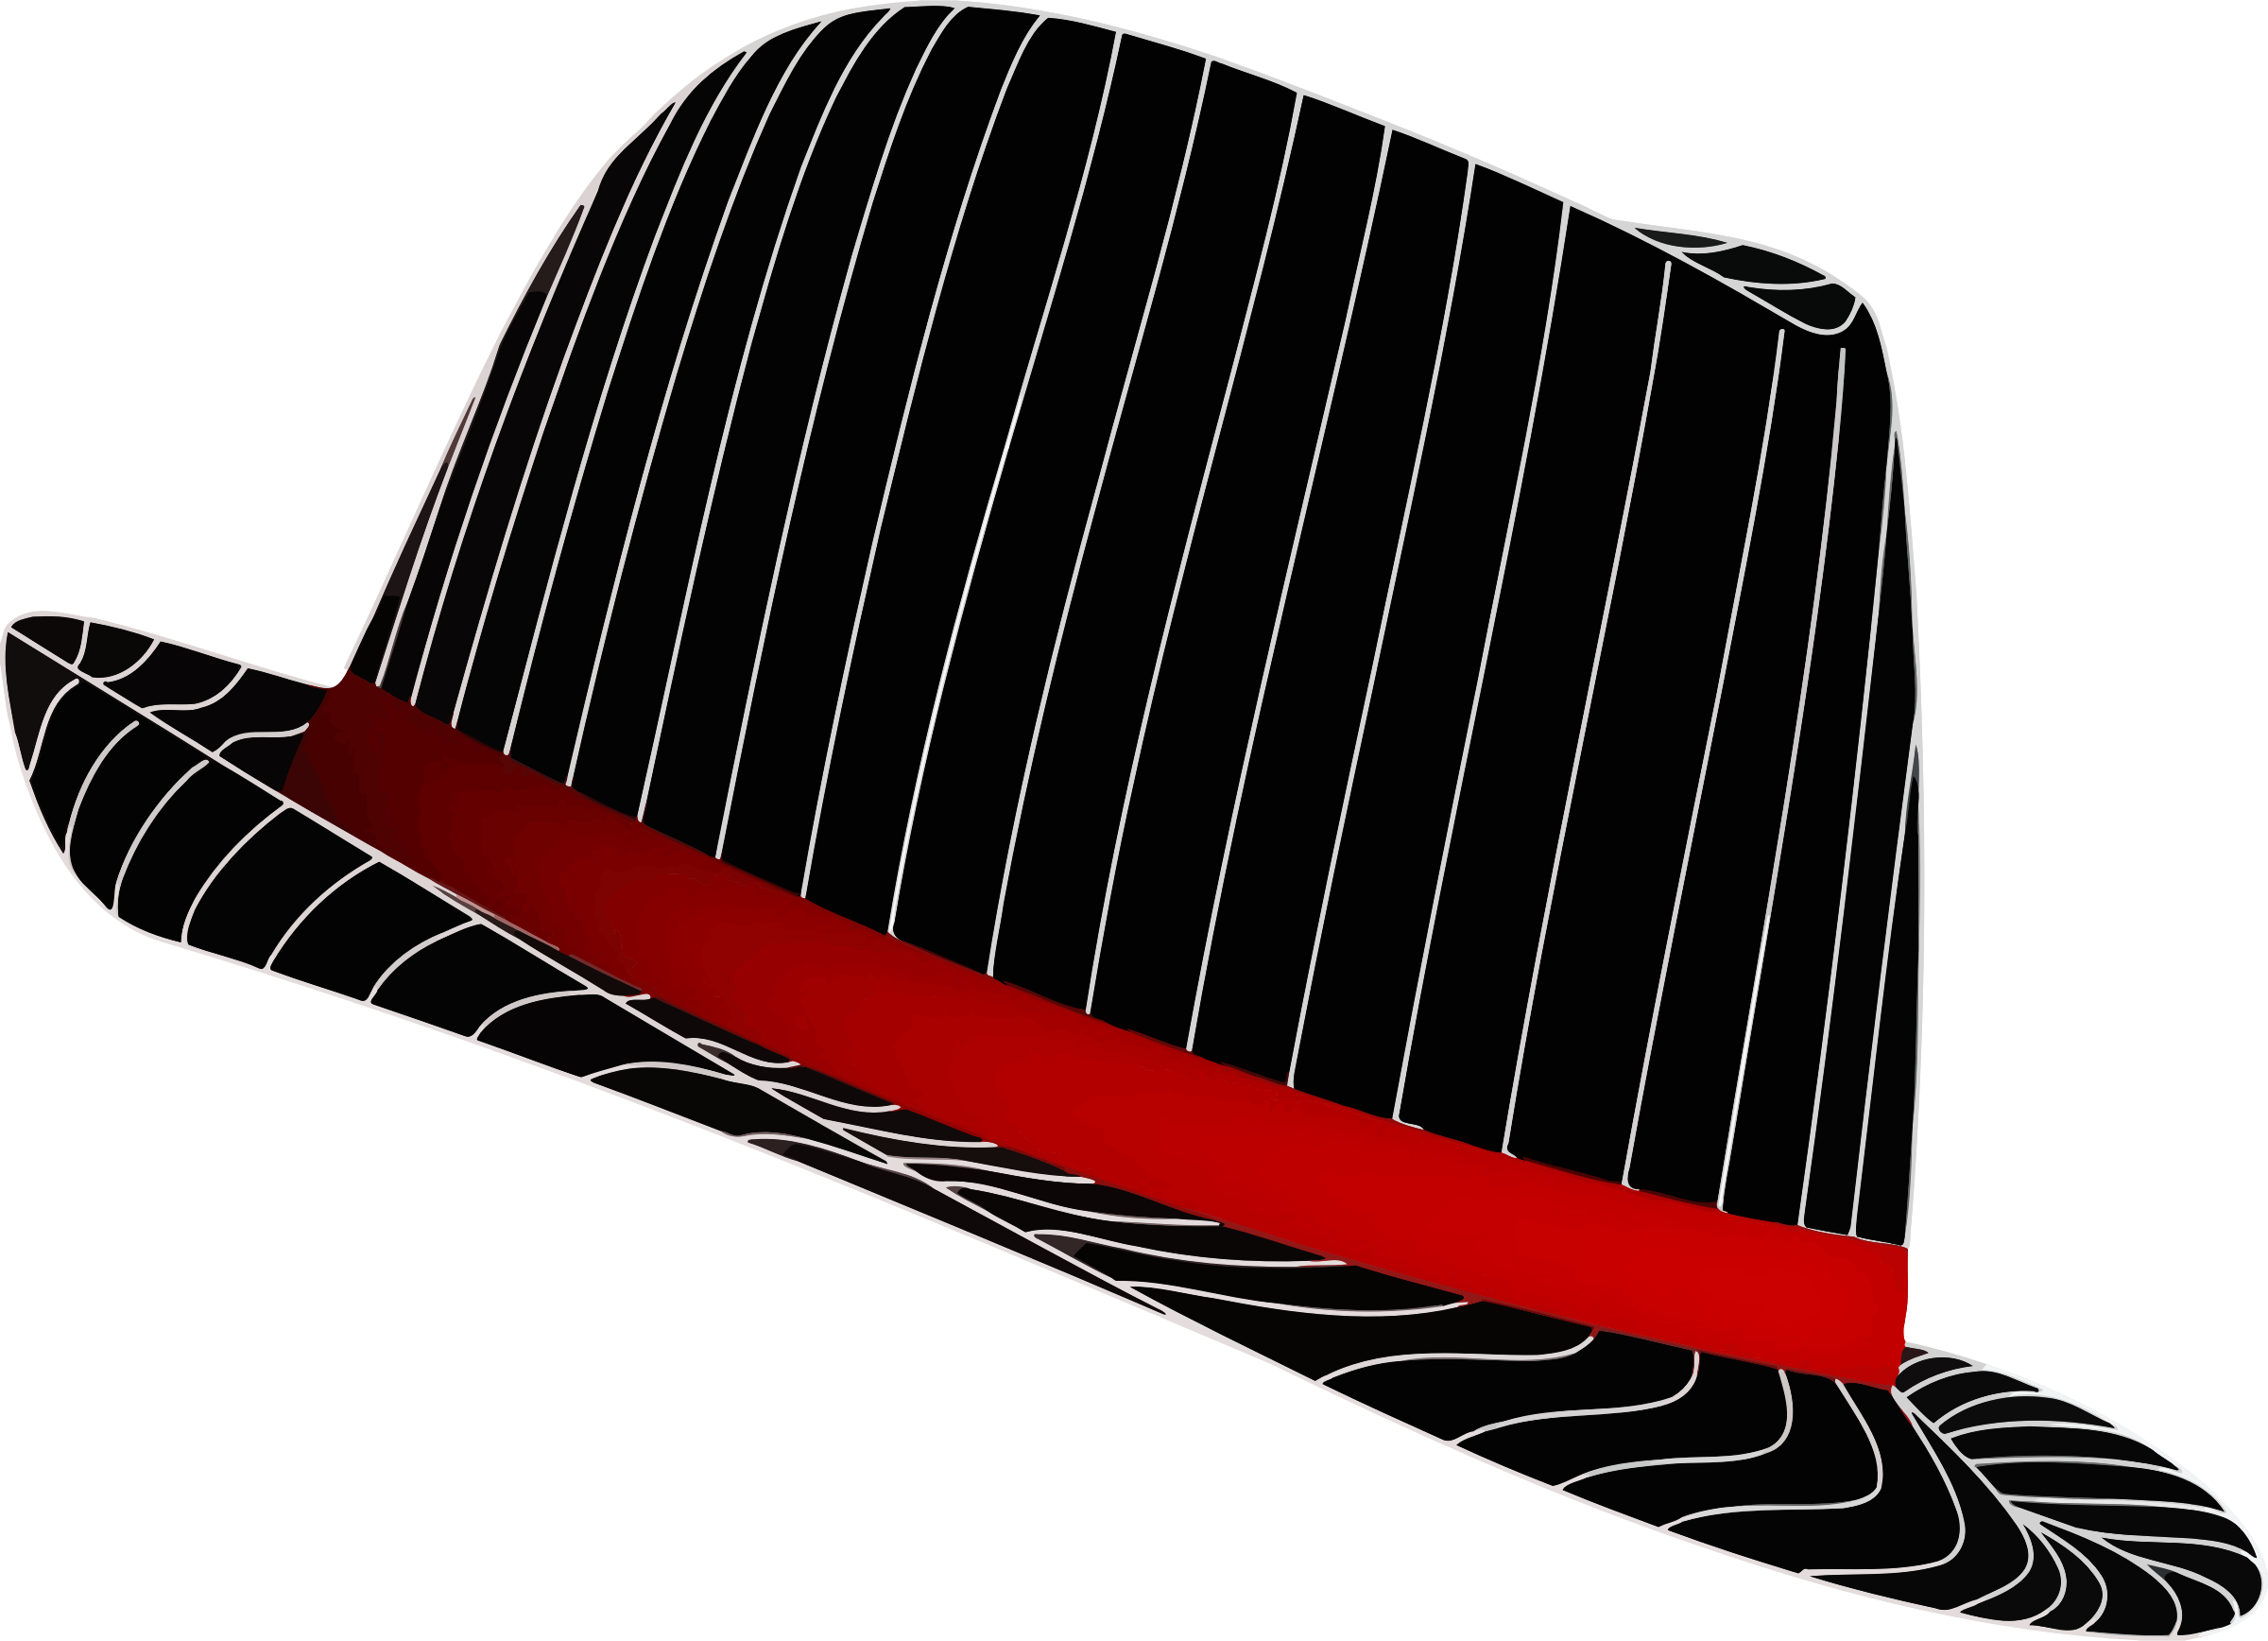 fedora clipart red